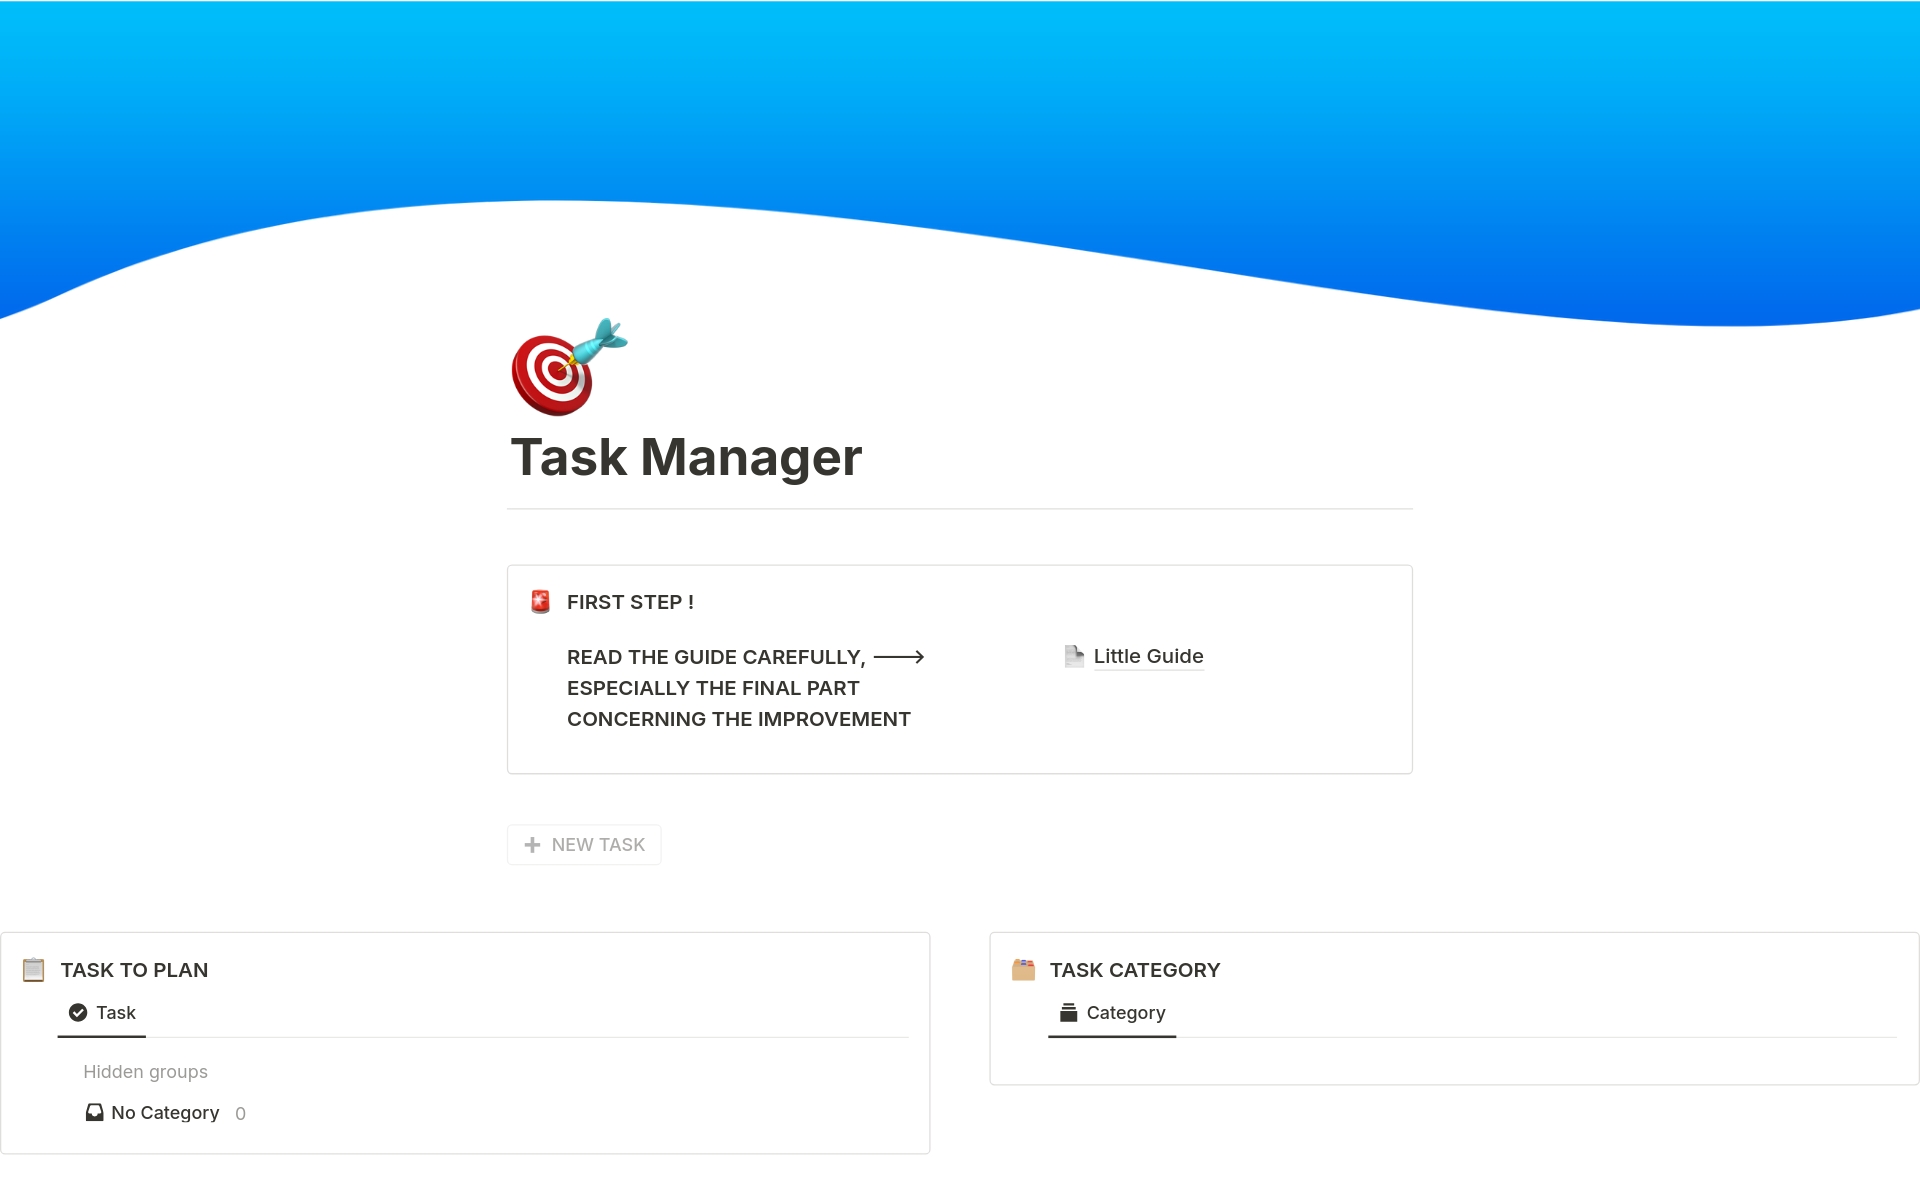 Organize your tasks simply and effectively